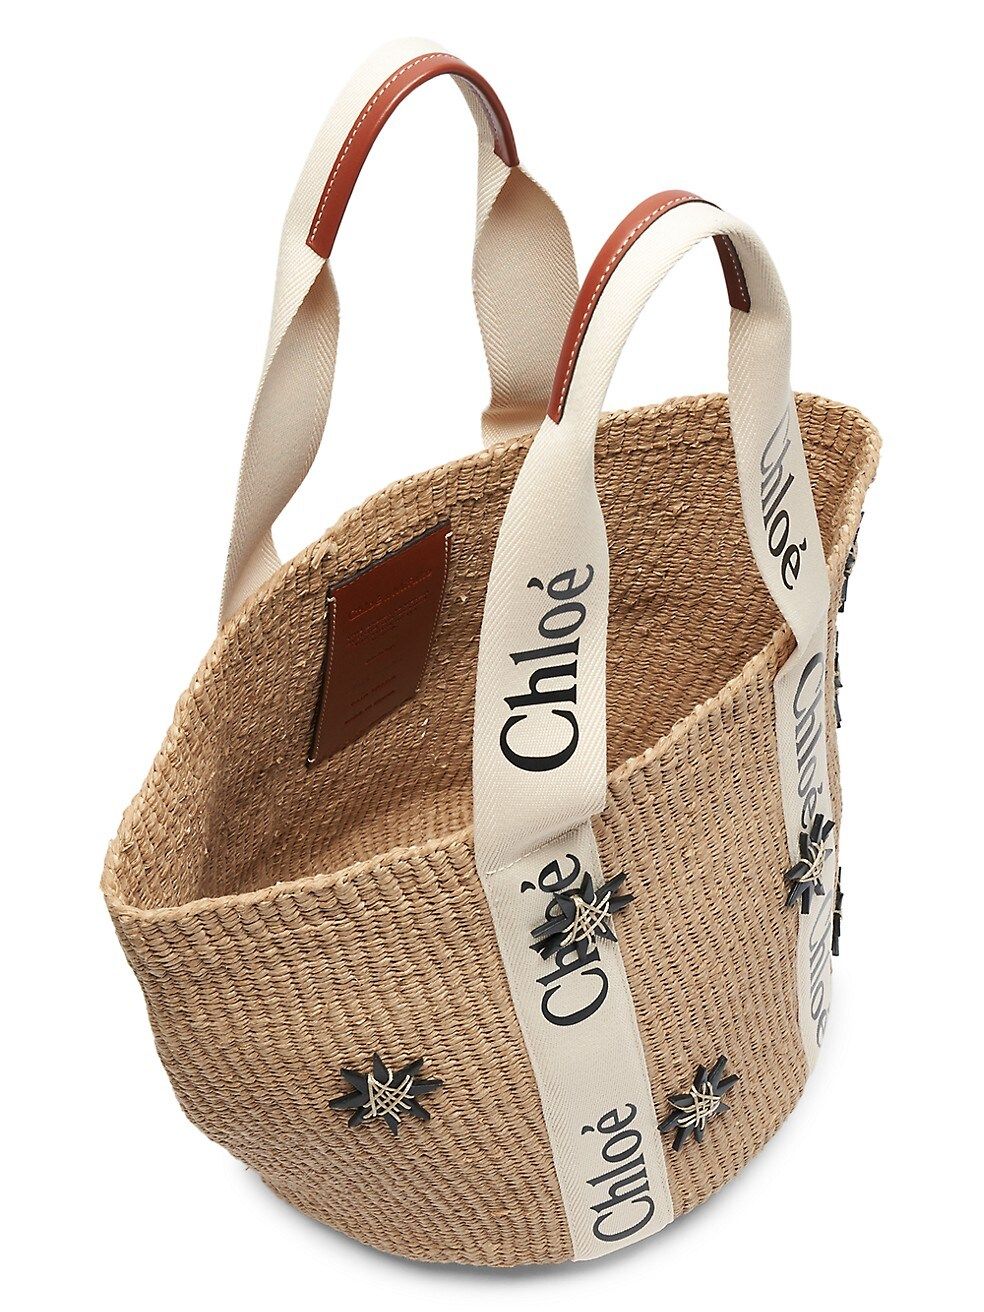 Chloé Large Woody Straw Basket Tote | Saks Fifth Avenue